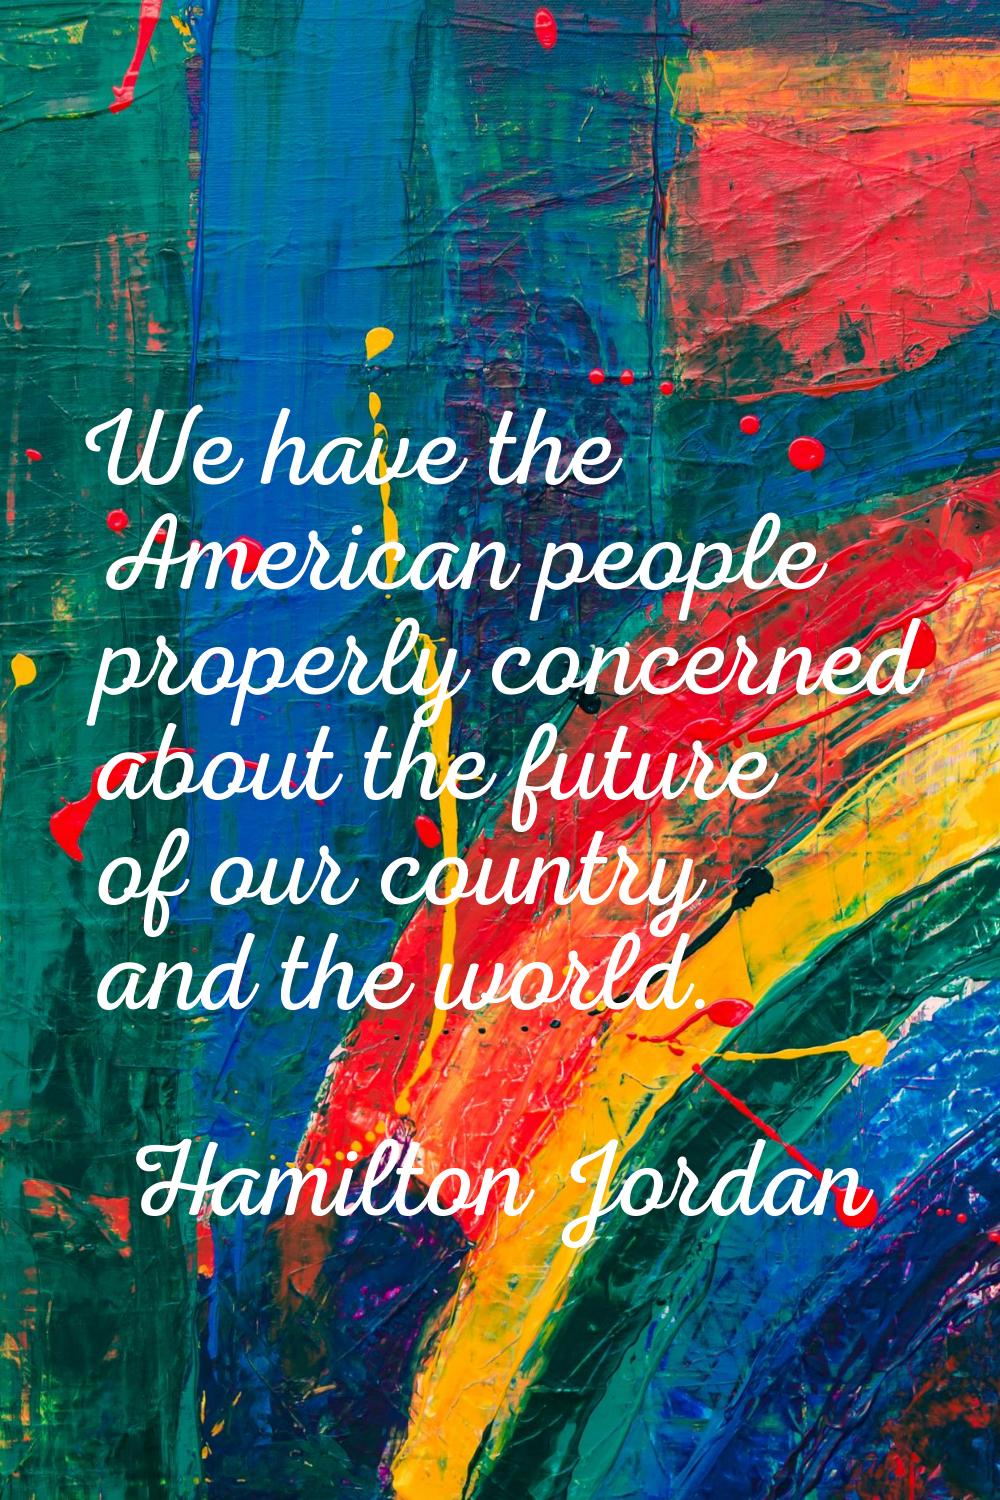 We have the American people properly concerned about the future of our country and the world.